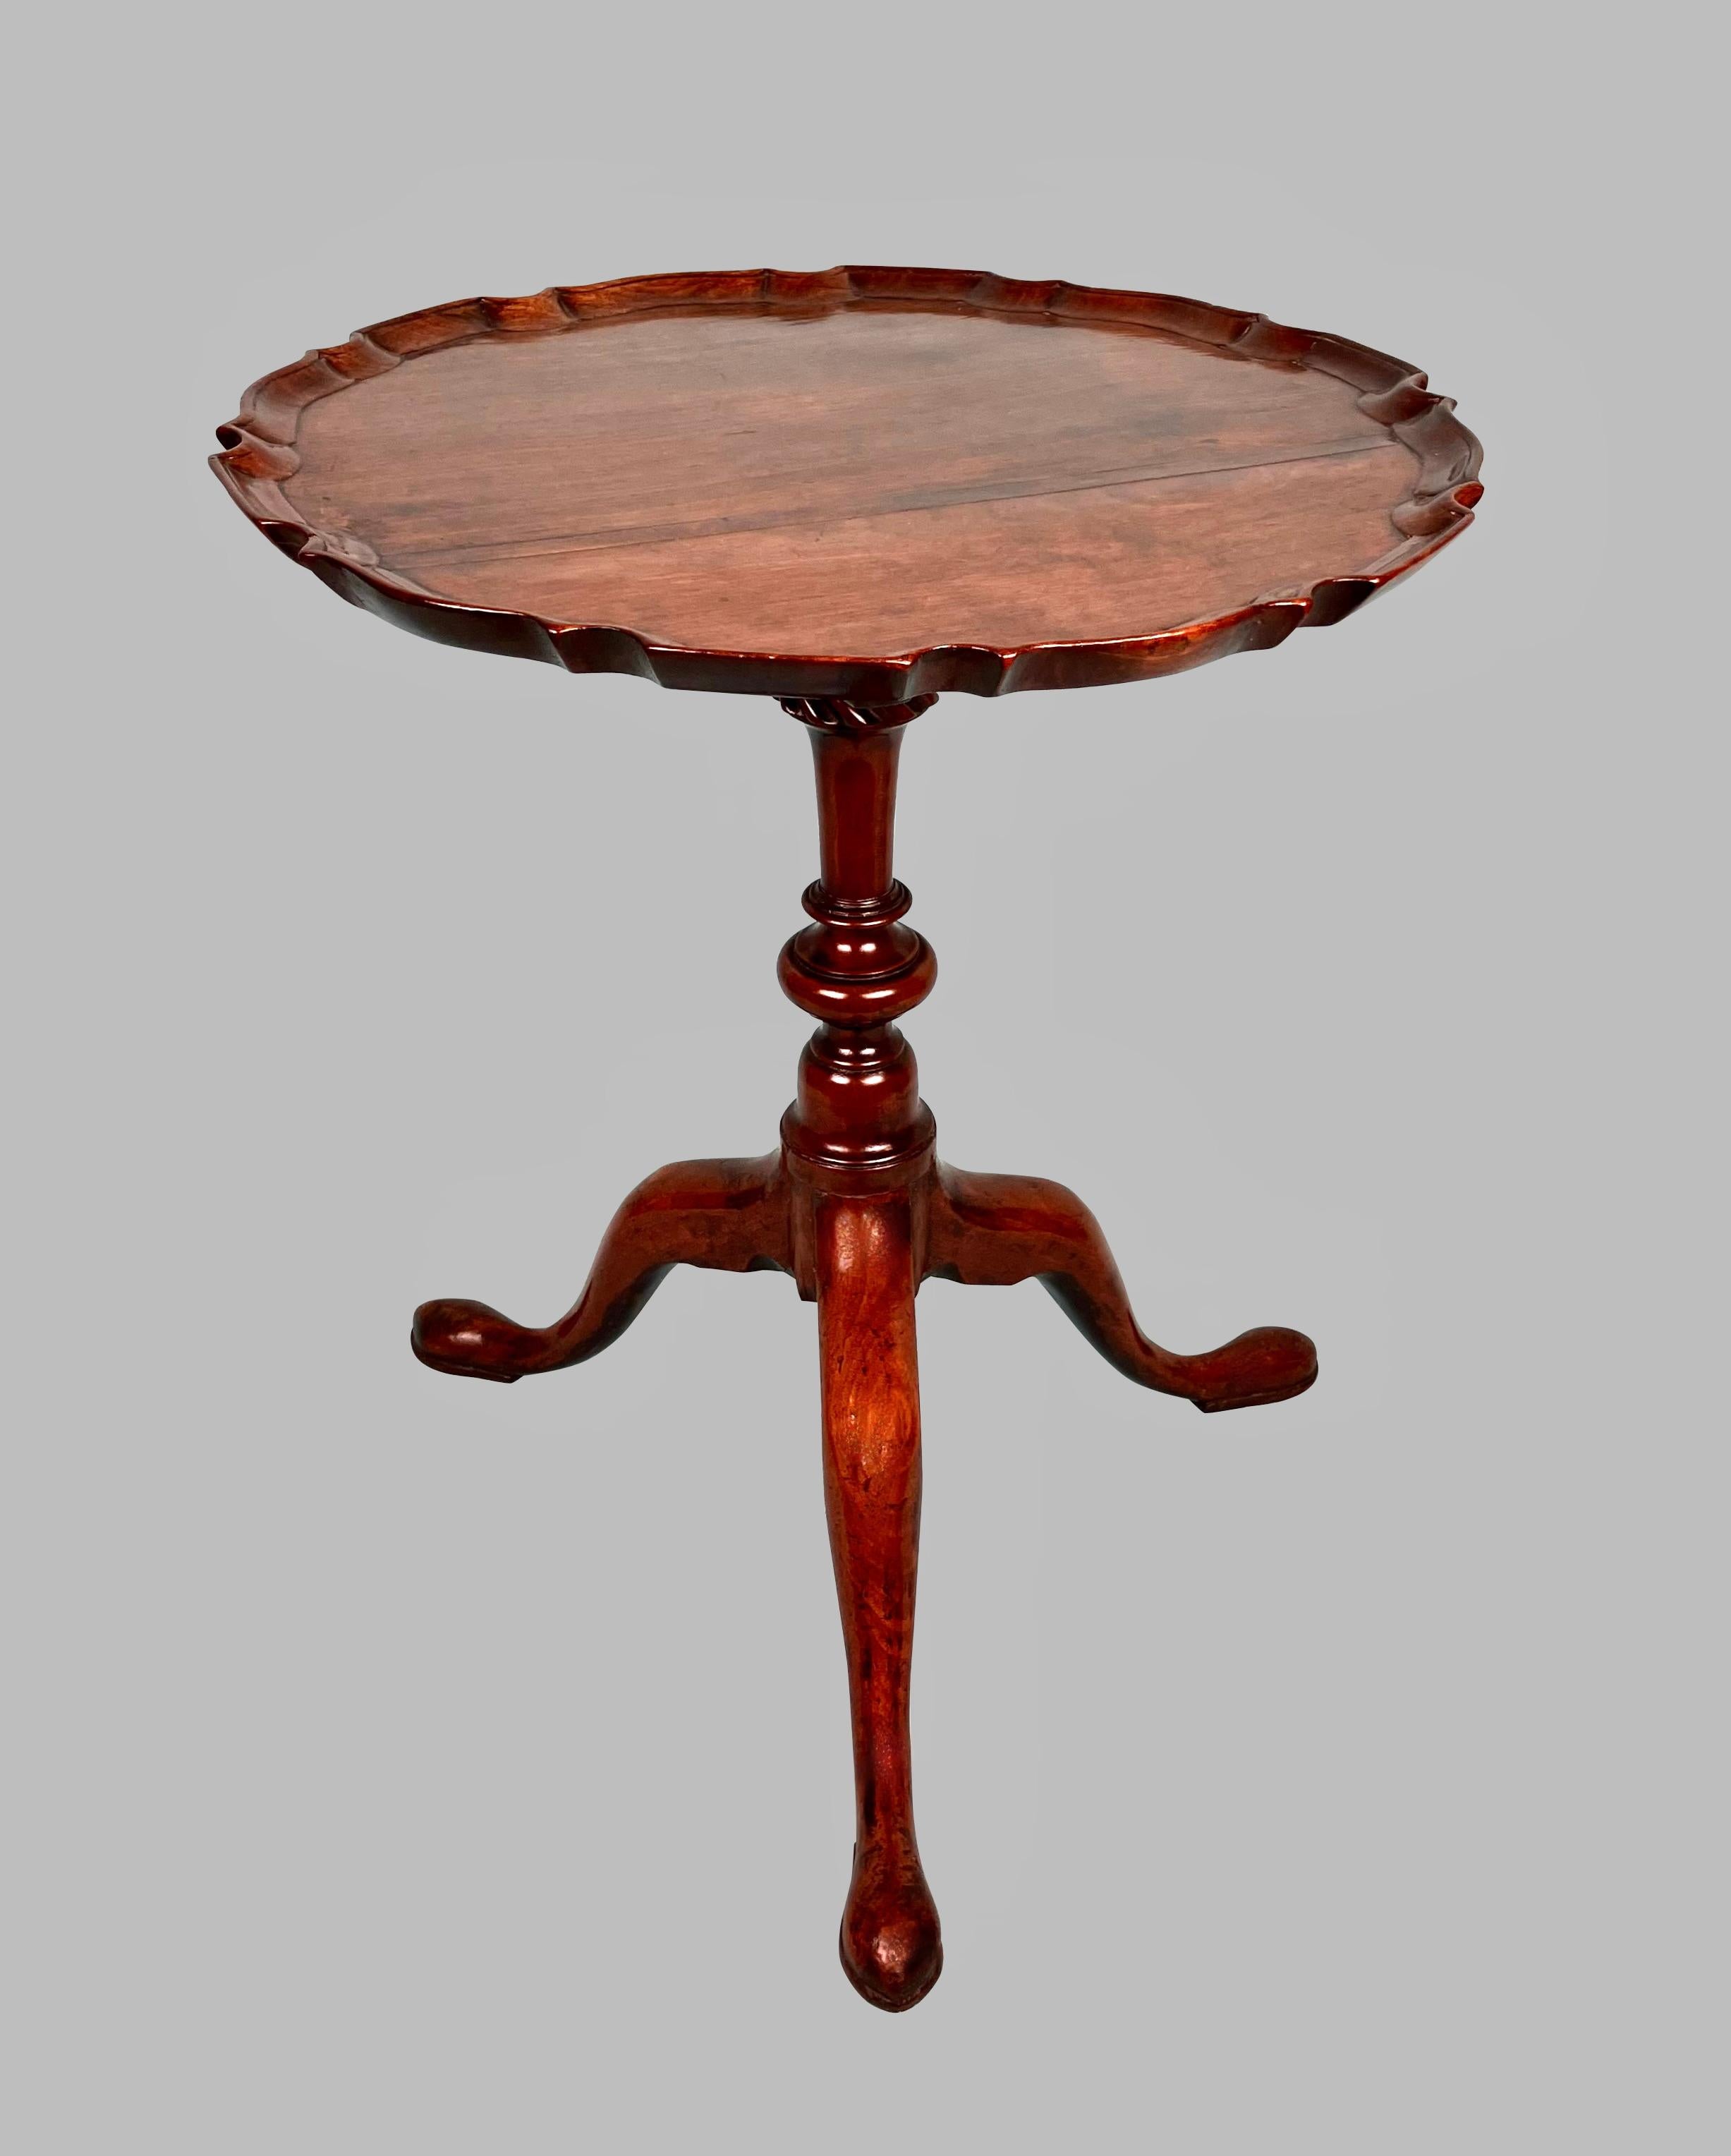 A charming small English mahogany Chippendale period occasional table with a well carved pie crust edge supported on a well-turned baluster column with a fluted top supported on a tripod base with pad feet. Attractive figure to the top. Old repairs.